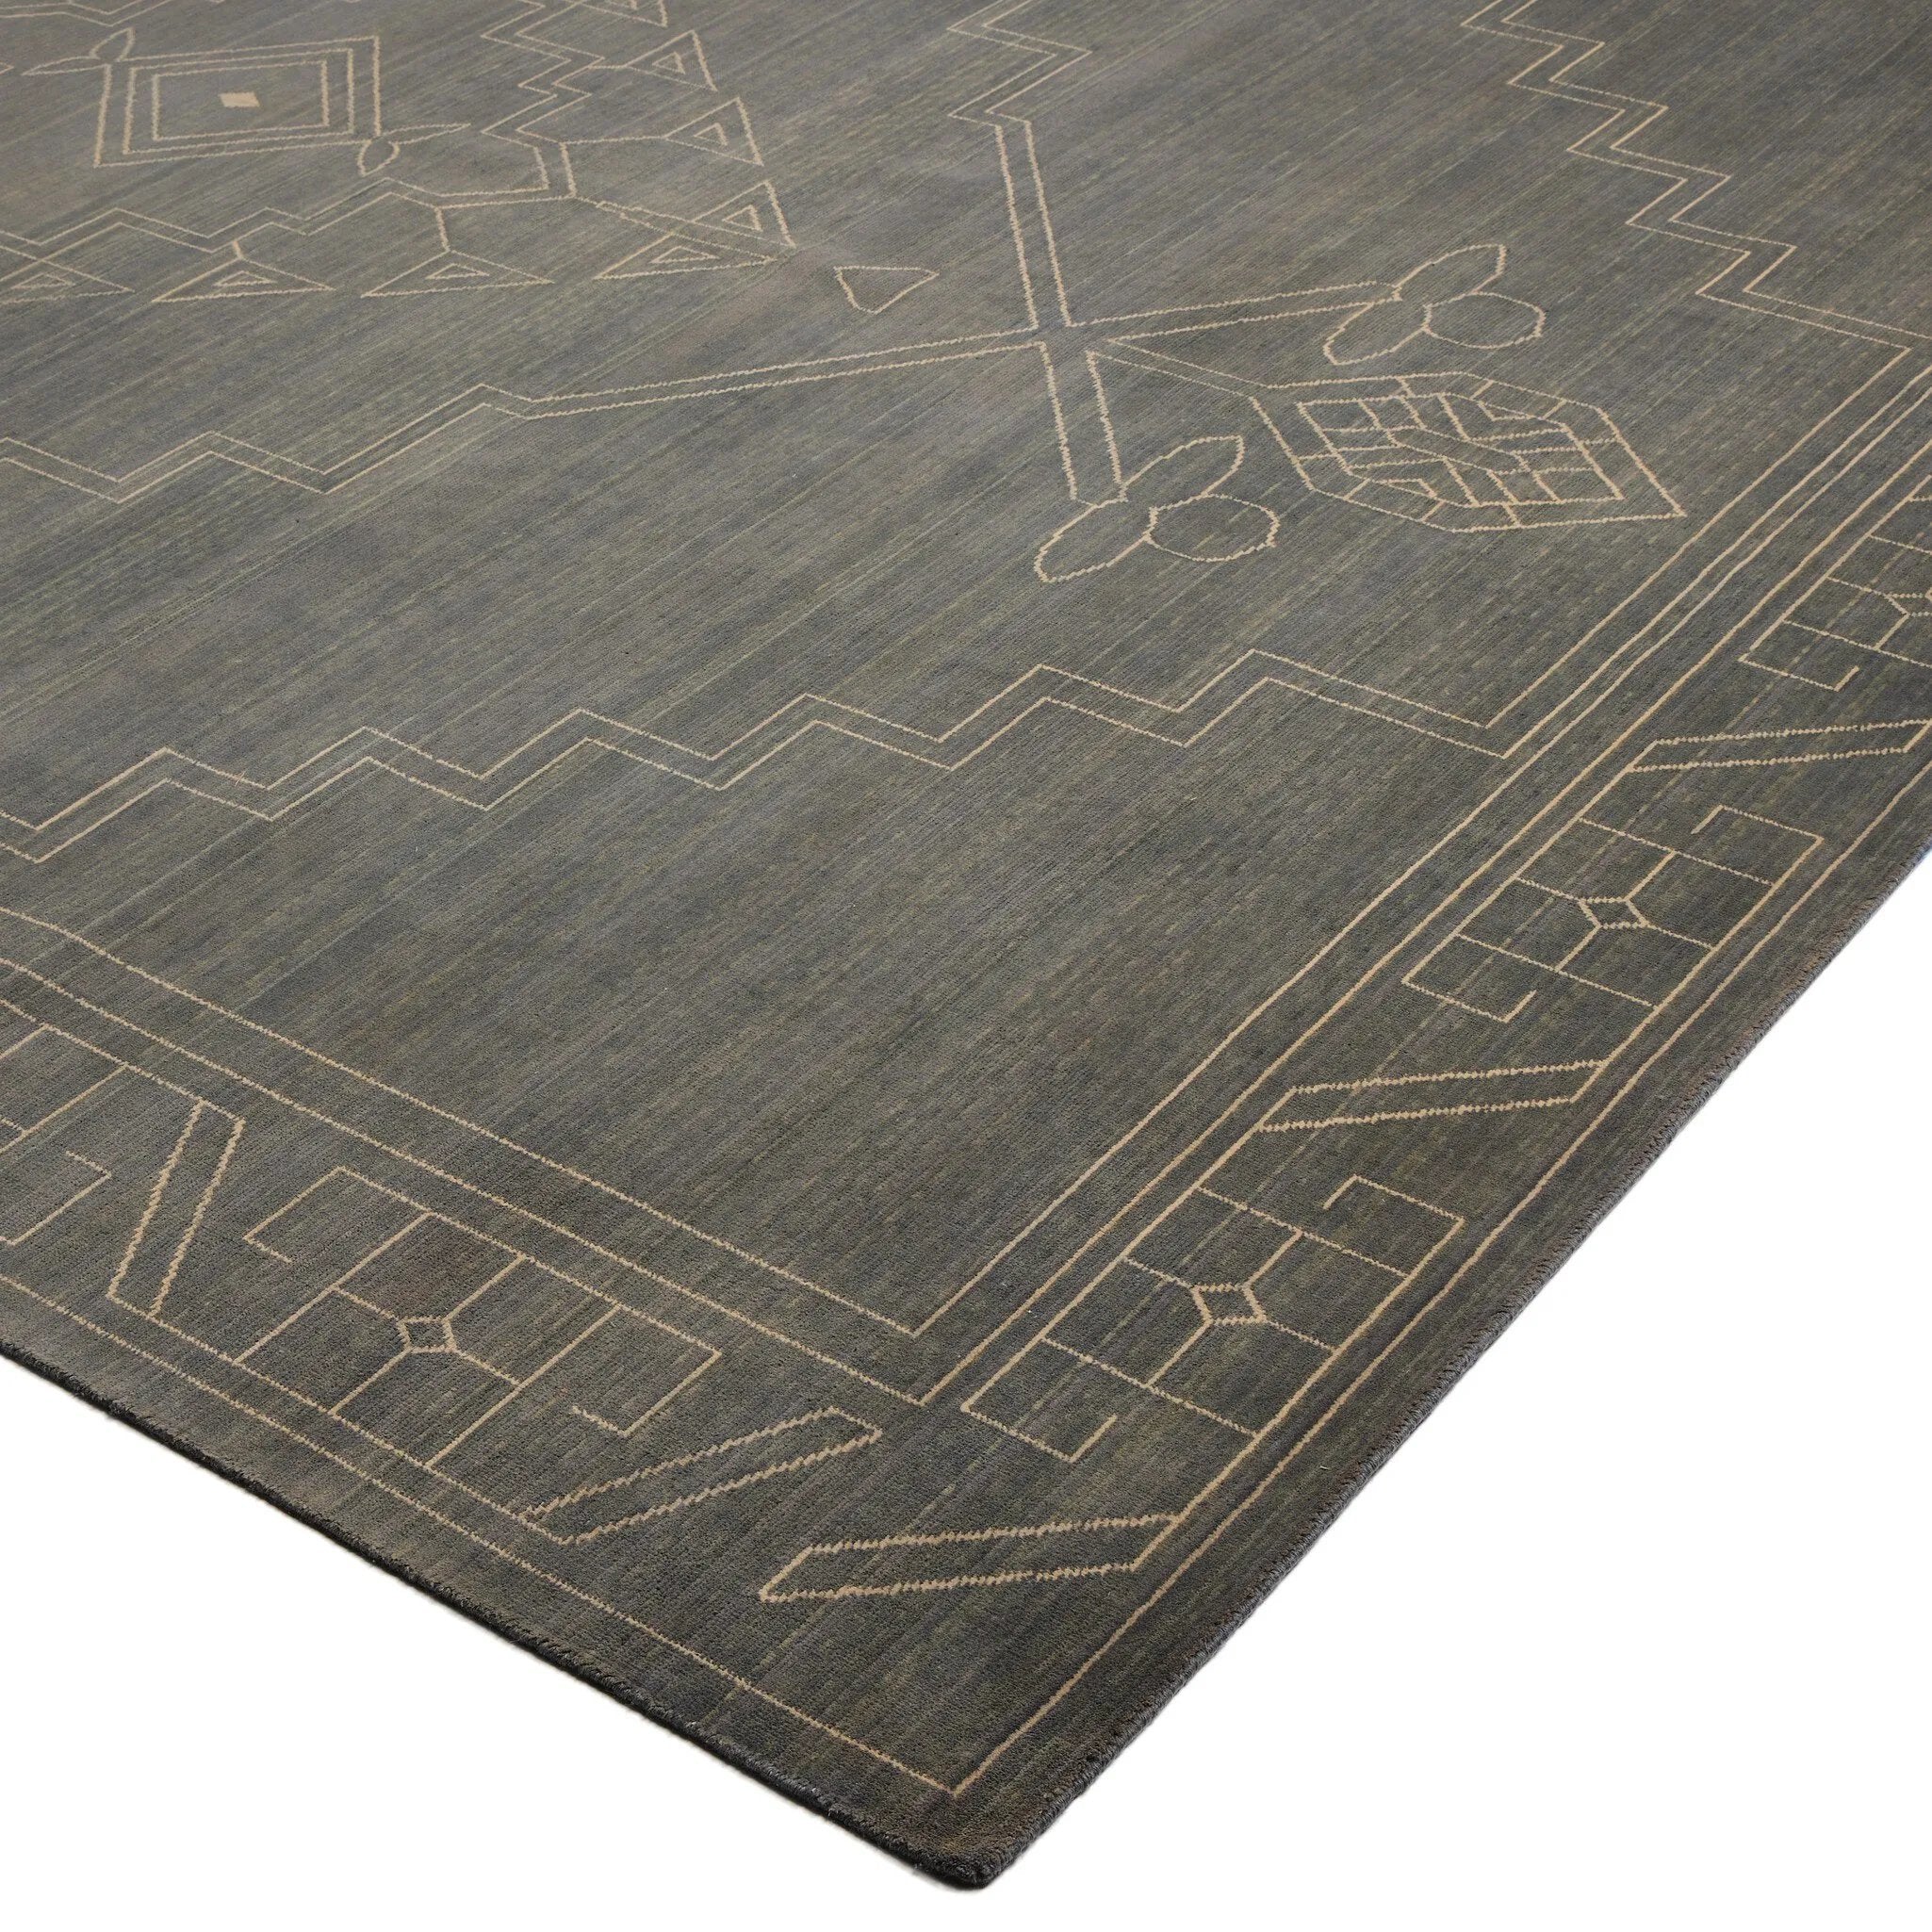 A subtle Turkish-inspired pattern adorns this wool-blend rug. The pattern and ground are purposefully similar in color for a unique take on a neutral.Overall Dimensions108.00"w x 144.00"d x 0.50"hFull Details &amp; SpecificationsTear SheetCleaning Code : X (vacuum Or Light Brush, No Cleaning Products Amethyst Home provides interior design, new home construction design consulting, vintage area rugs, and lighting in the Newport Beach metro area.